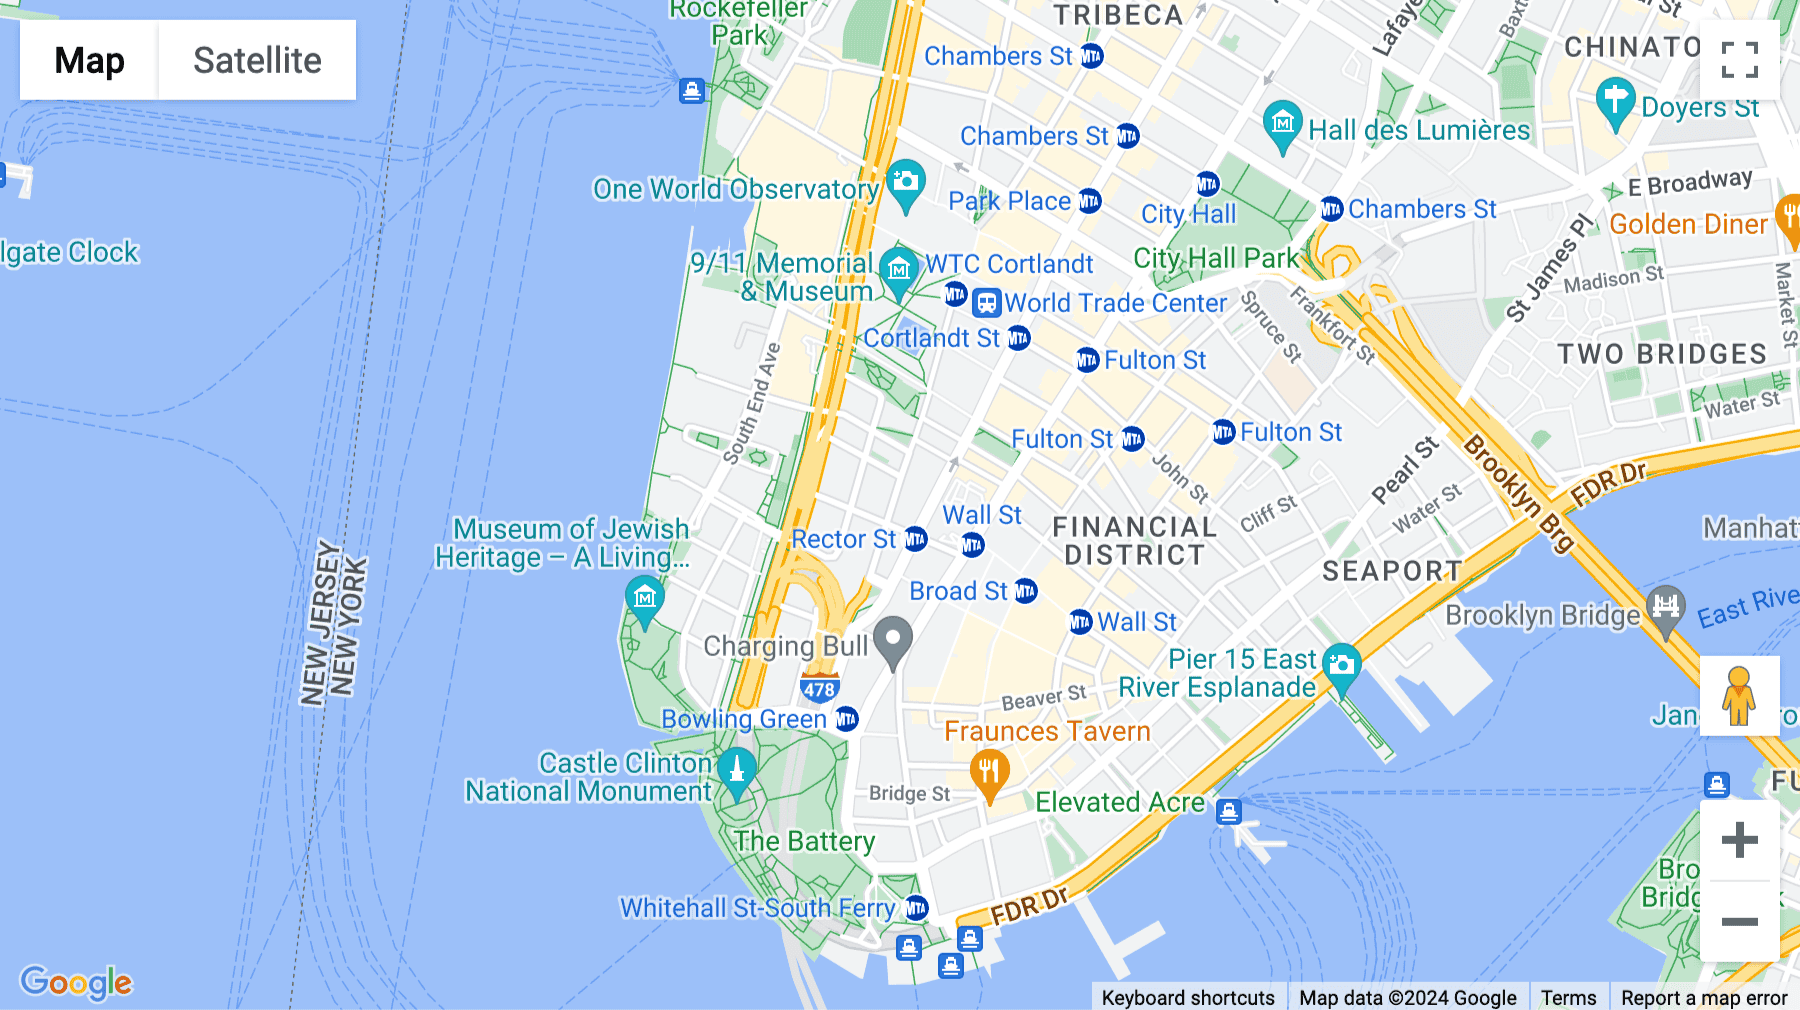 Click for interative map of 101 Greenwich St, New York City